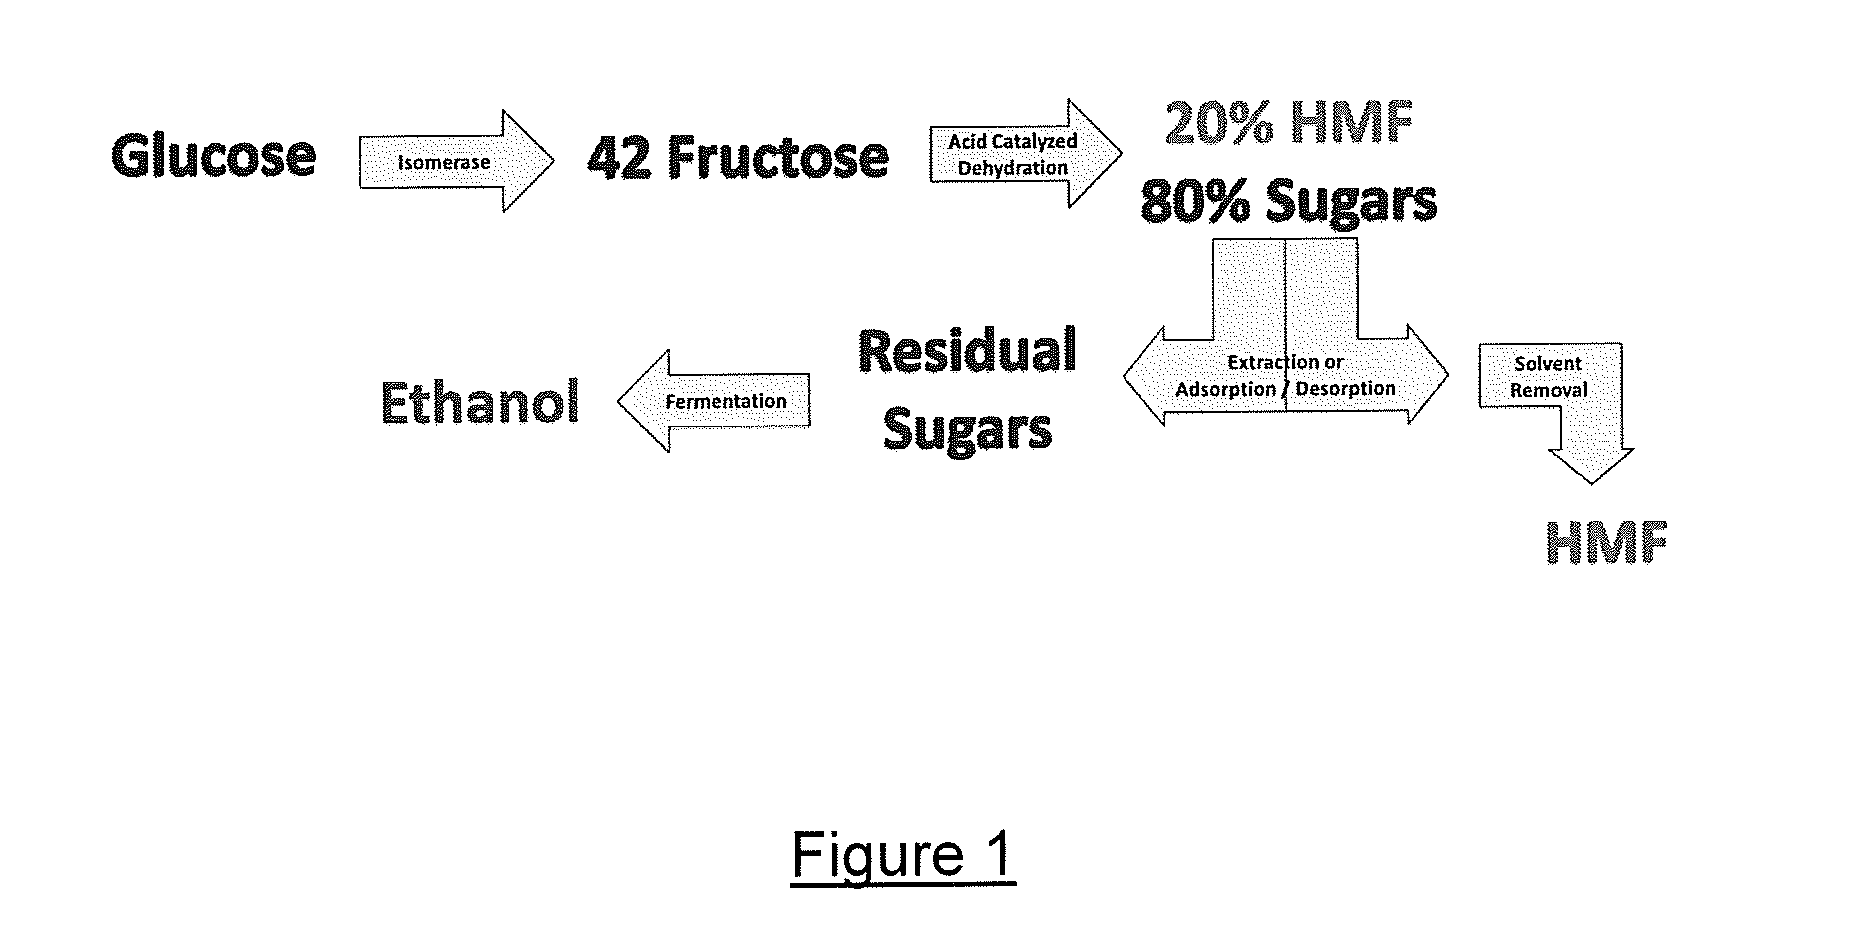 Process for making hmf and hmf derivatives from sugars, with recovery of unreacted sugars suitable for direct fermentation to ethanol